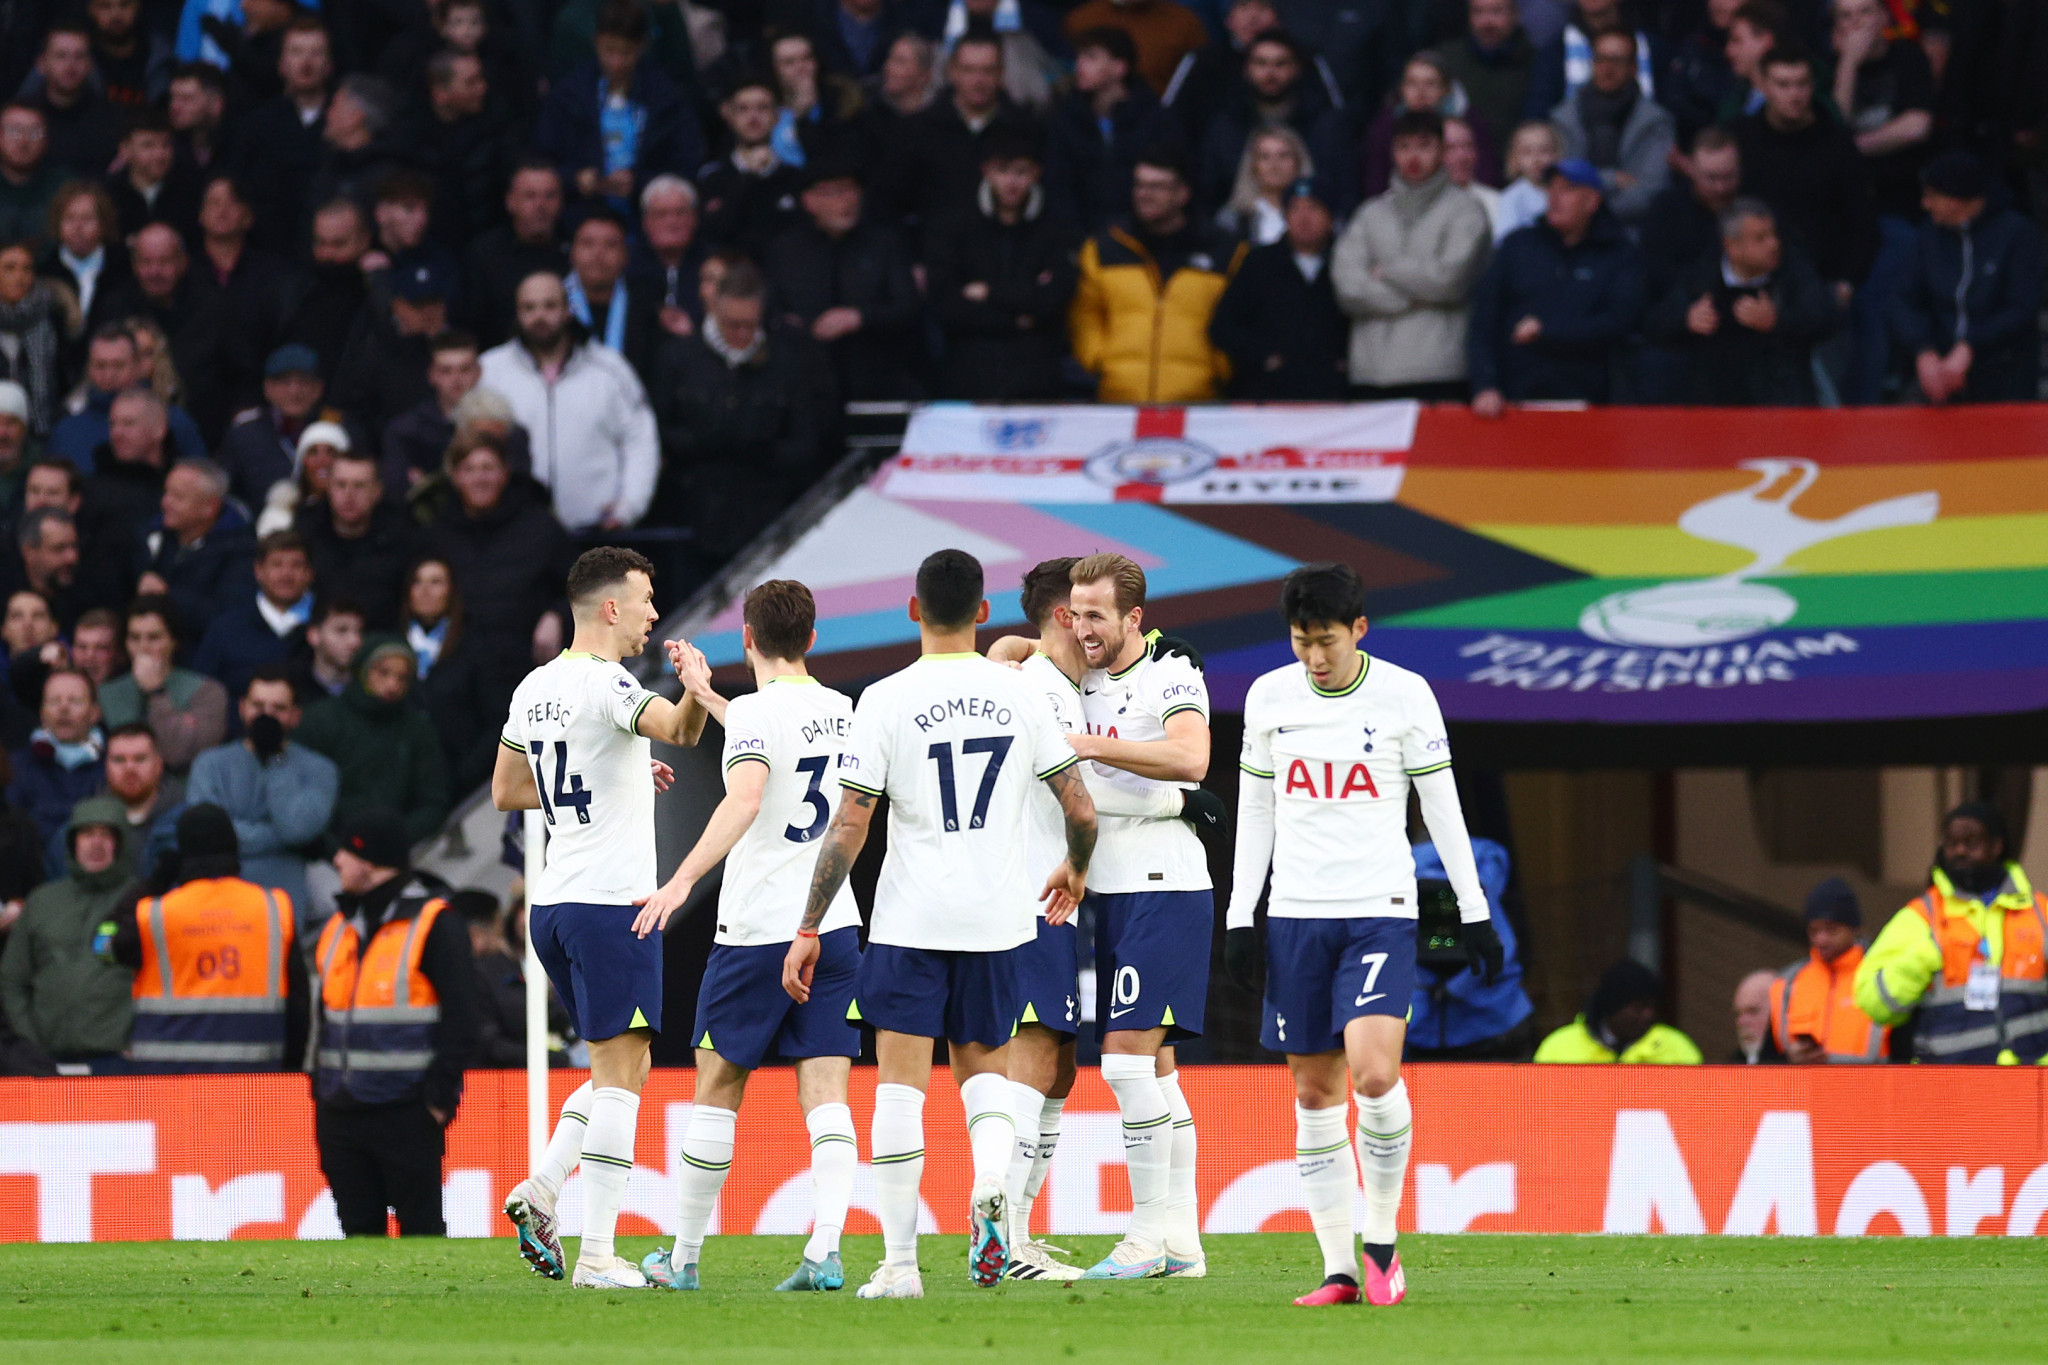 South African Tourism's  proposed shirt sleeve sponsorship deal with Premier League Tottenham Hotspur provoked widespread criticism in South Africa ©Getty Images